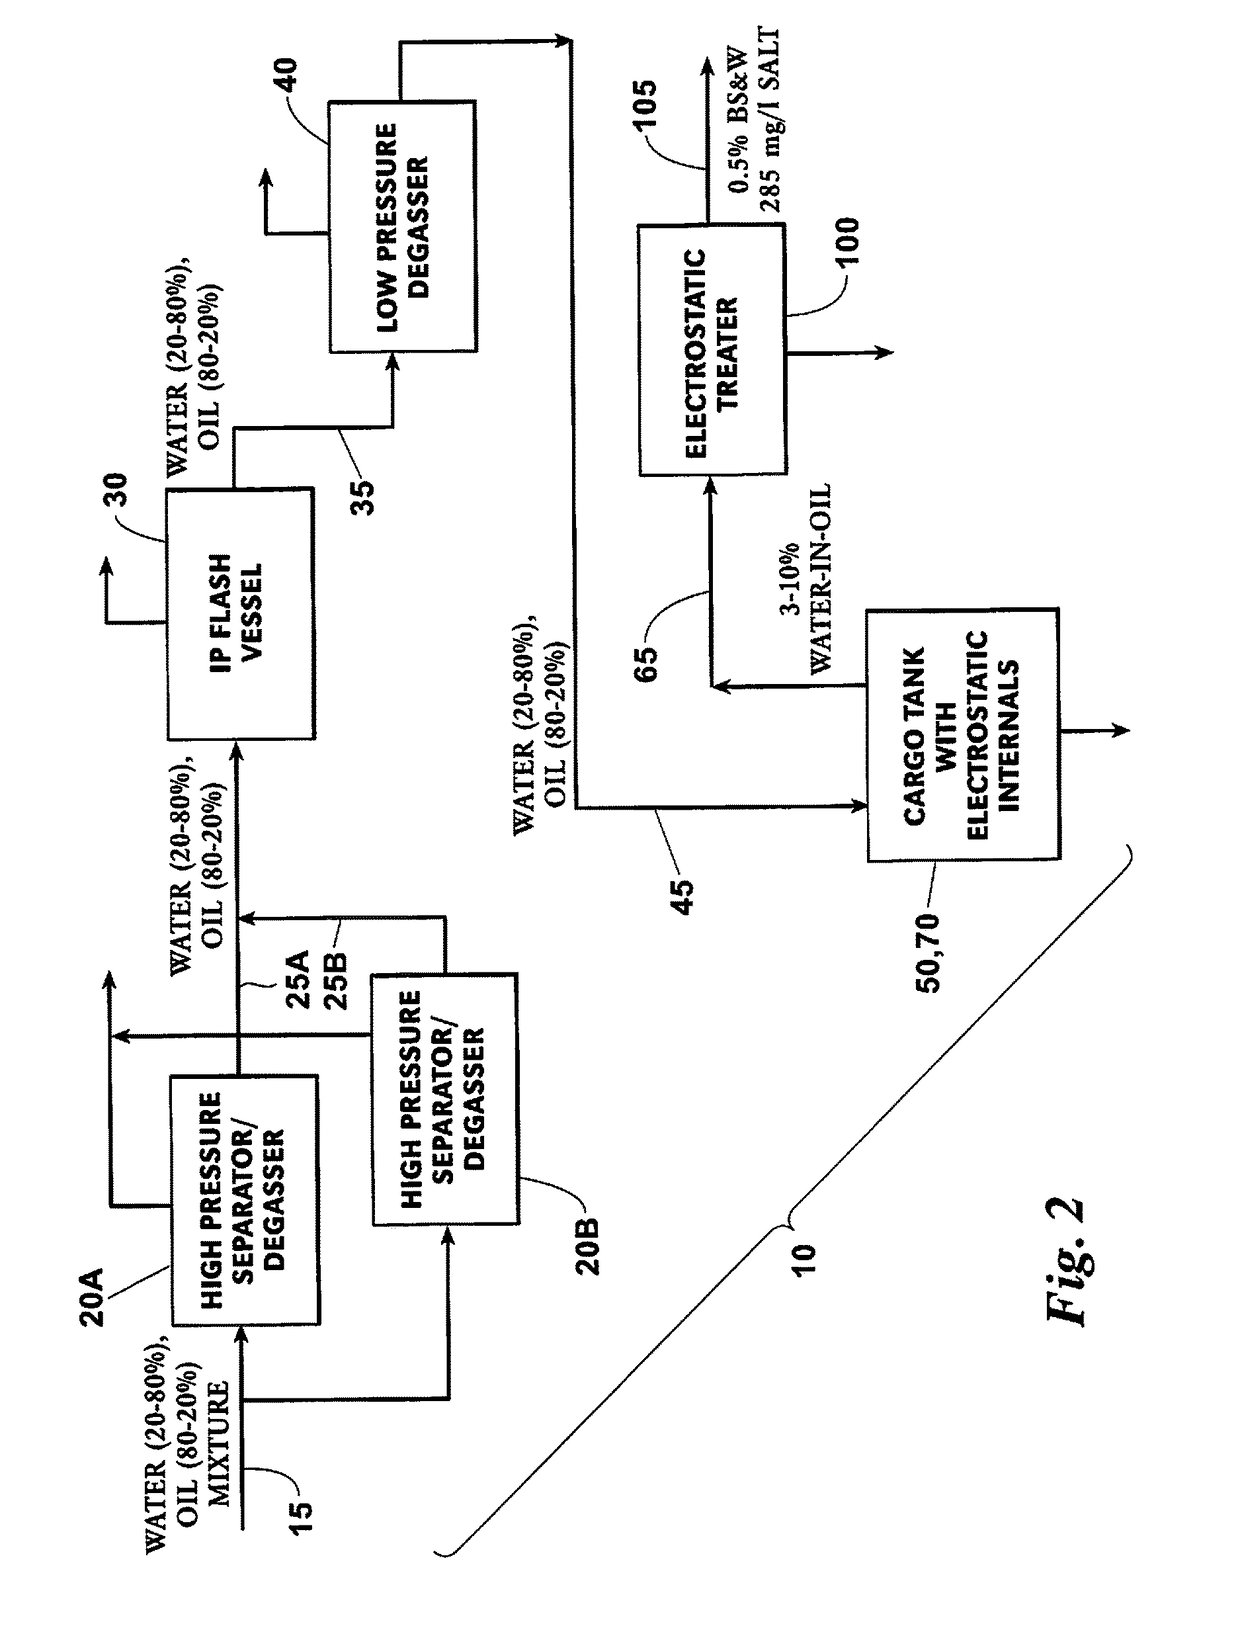 Electrostatic Technology System And Process To Dehydrate Crude Oil In A Crude Oil Storage Tank Of A Floating Production Storage And Offloading Installation